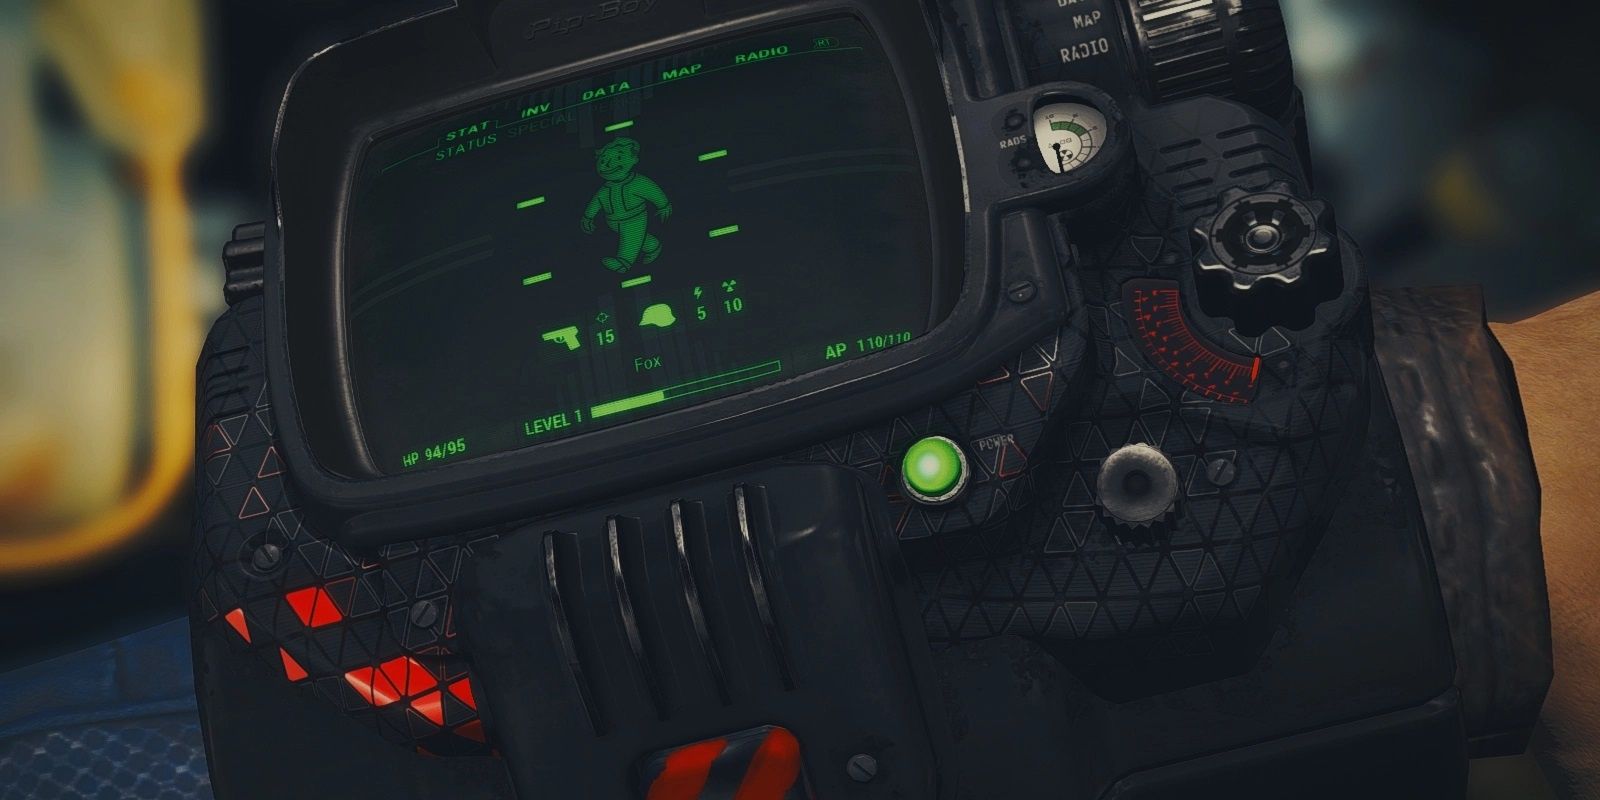 Star Wars TIE Fighter Pip-Boy Mod For Fallout 4